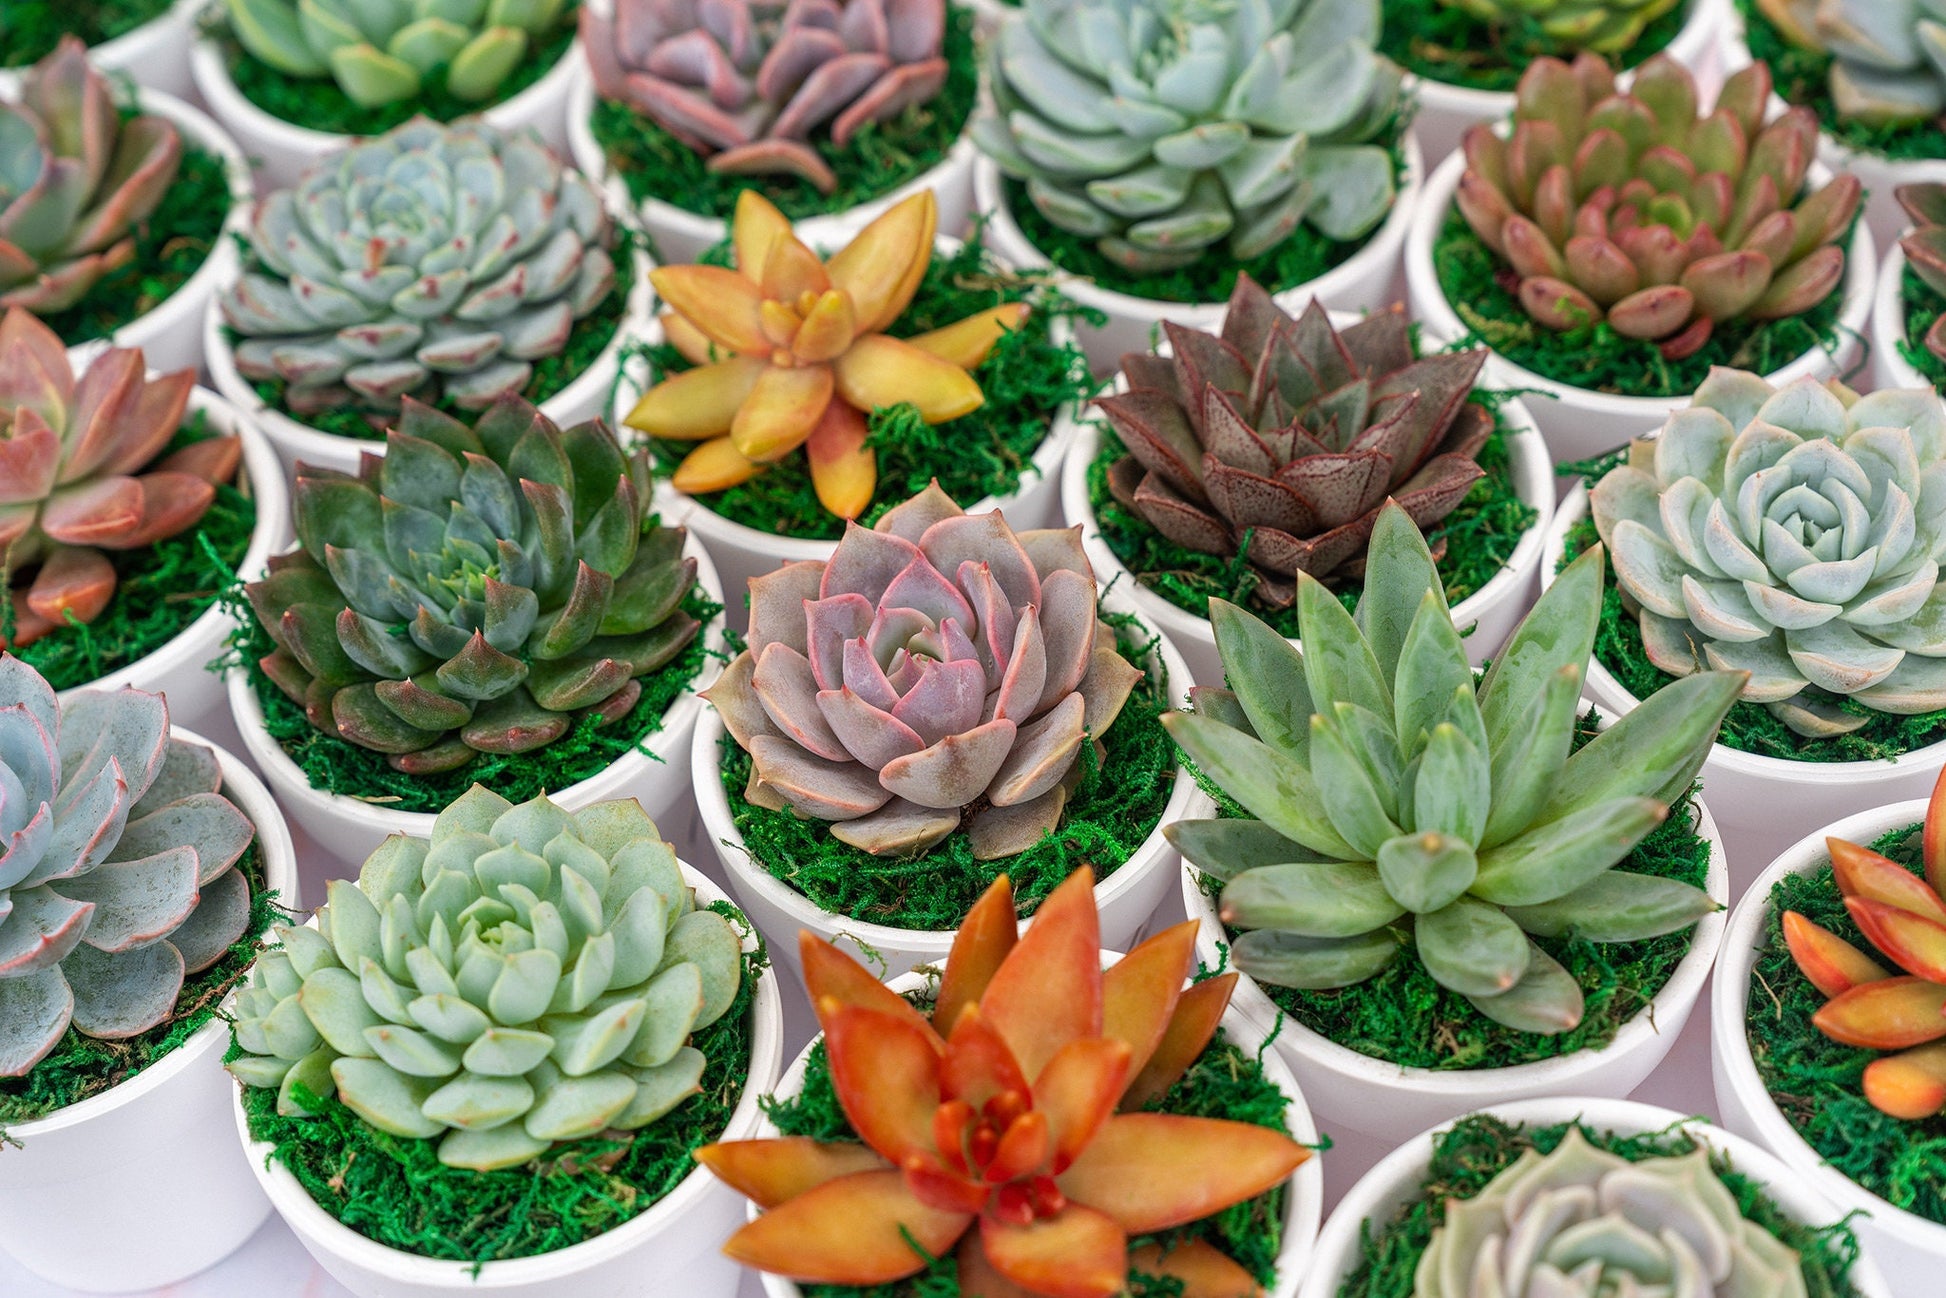 QTY 5+: Small White Living Succulent Favors w/ Custom Color Moss Topping in Clay Pot | Bulk Event Guest Gifts for Weddings, Showers, Parties